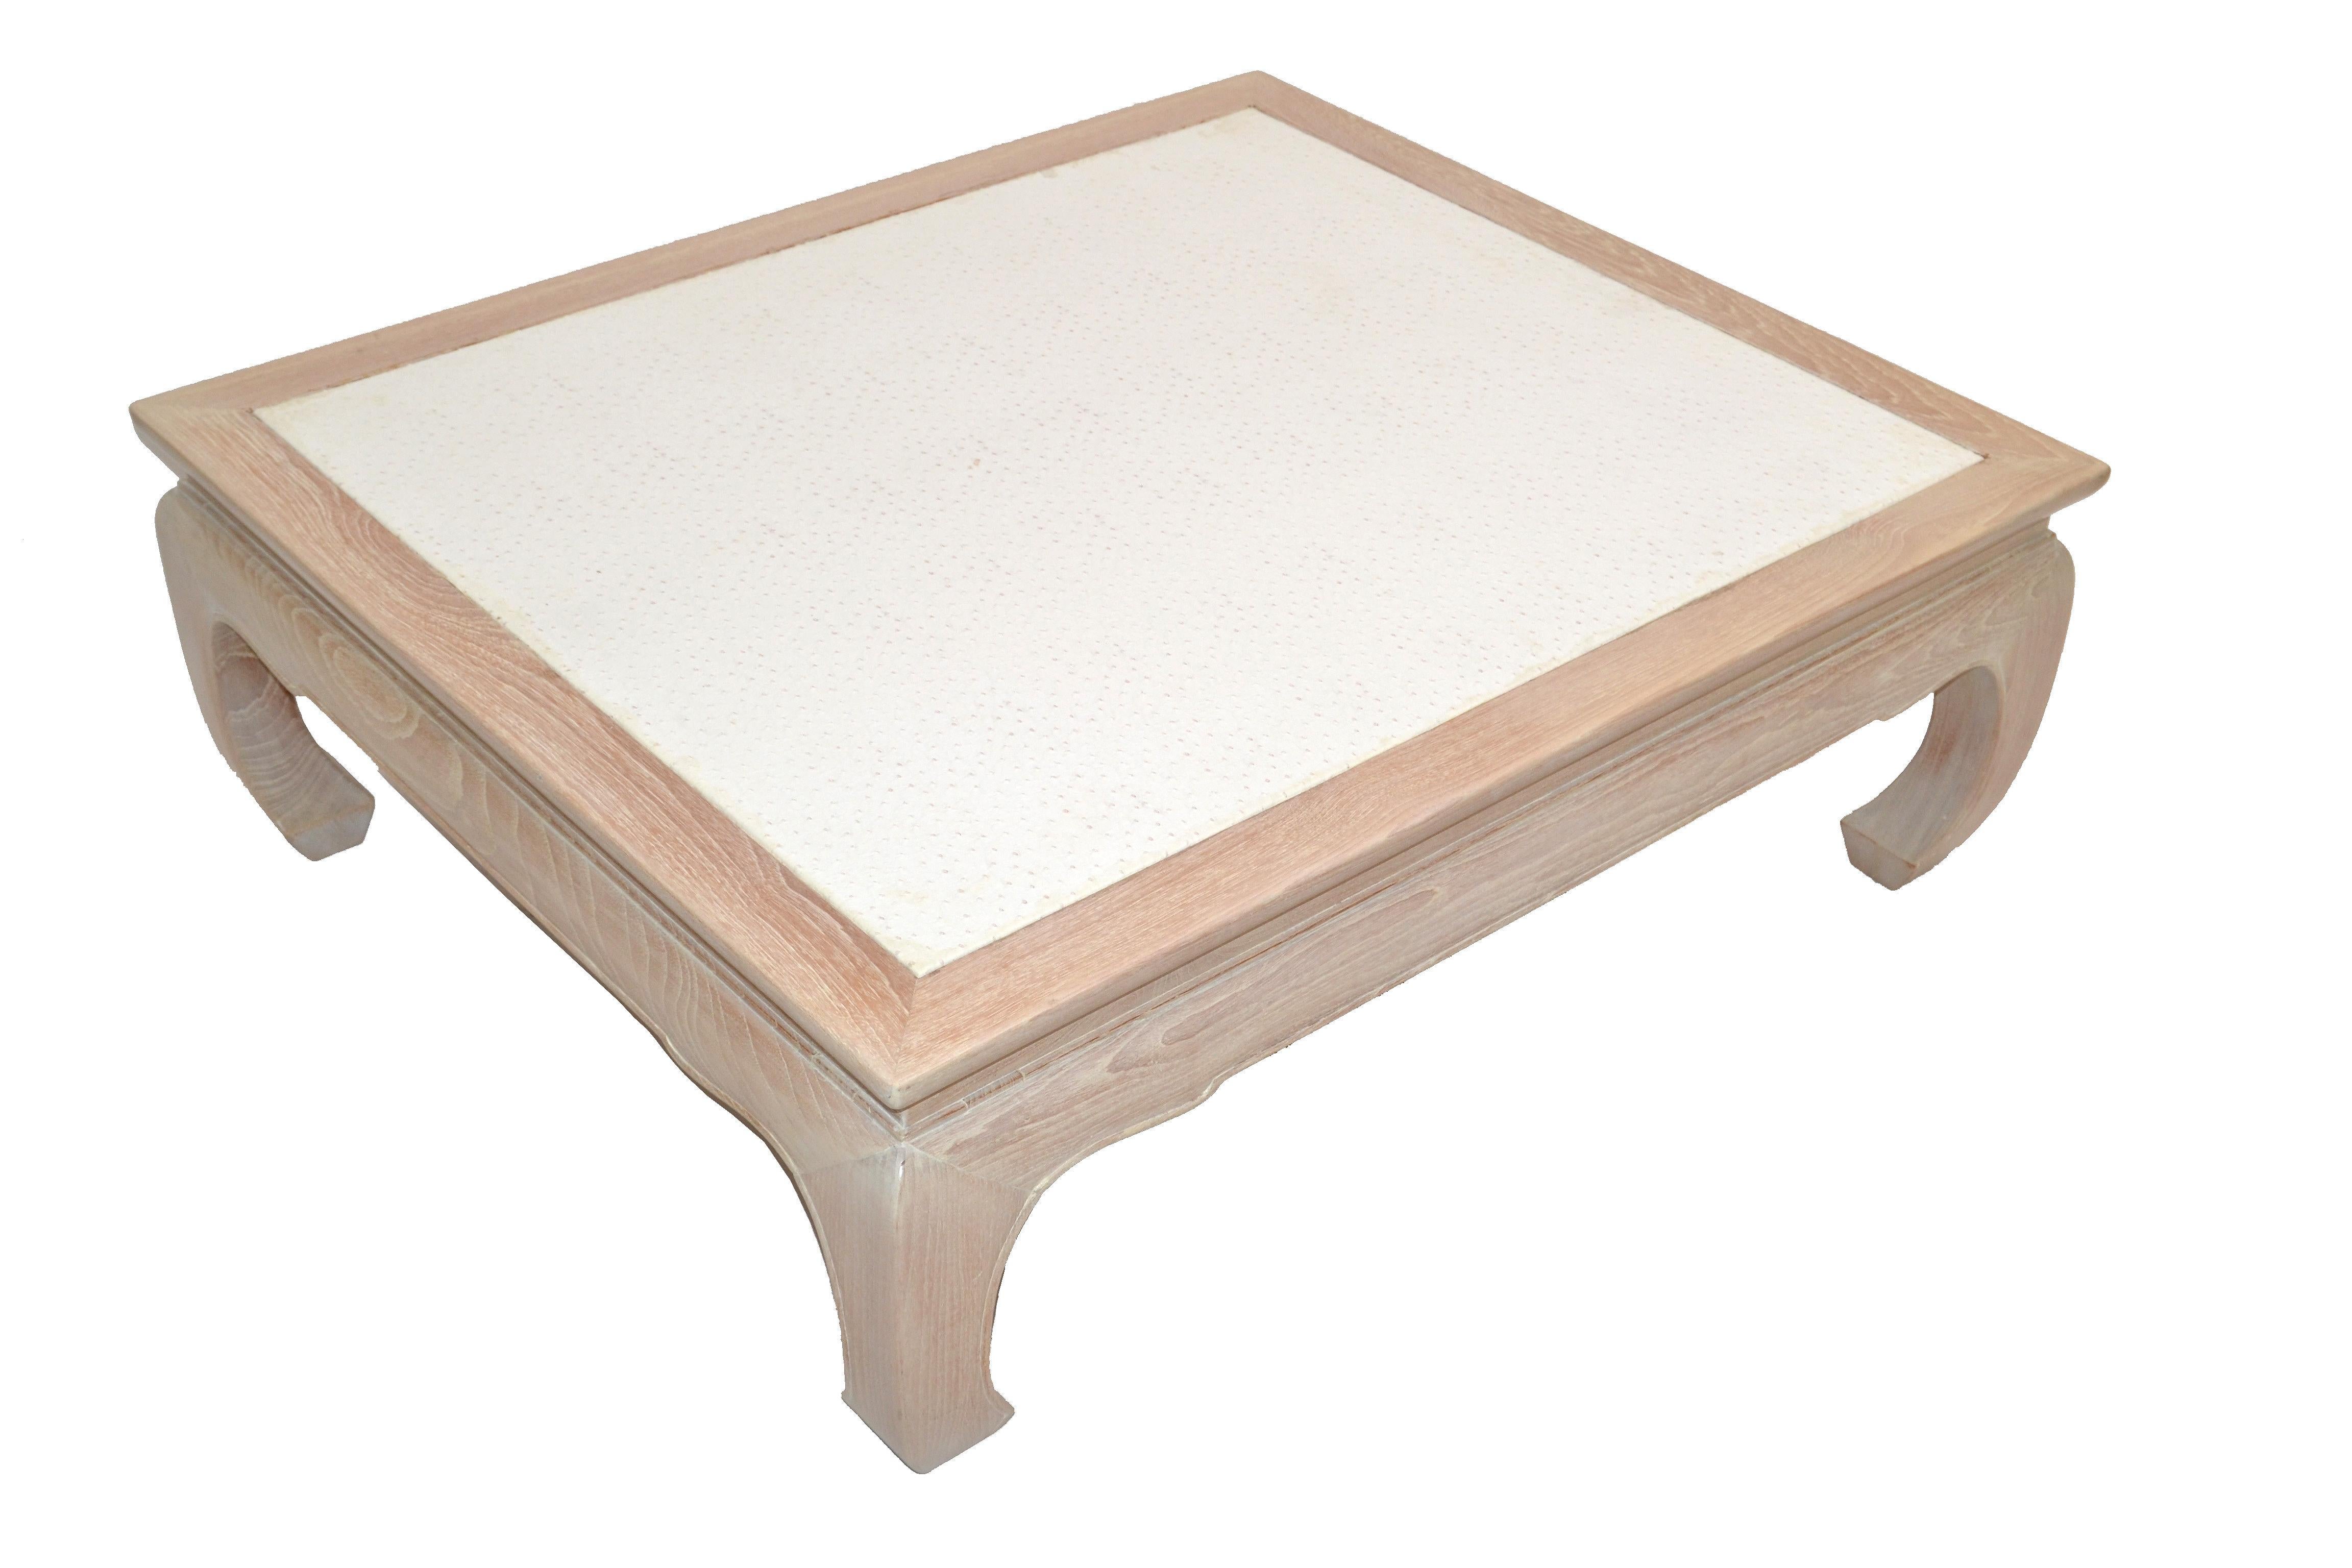 20th Century Asian Modern White Bleached Oak Coffee Table Faux Ostrich Top Chinoiserie, 1970s For Sale